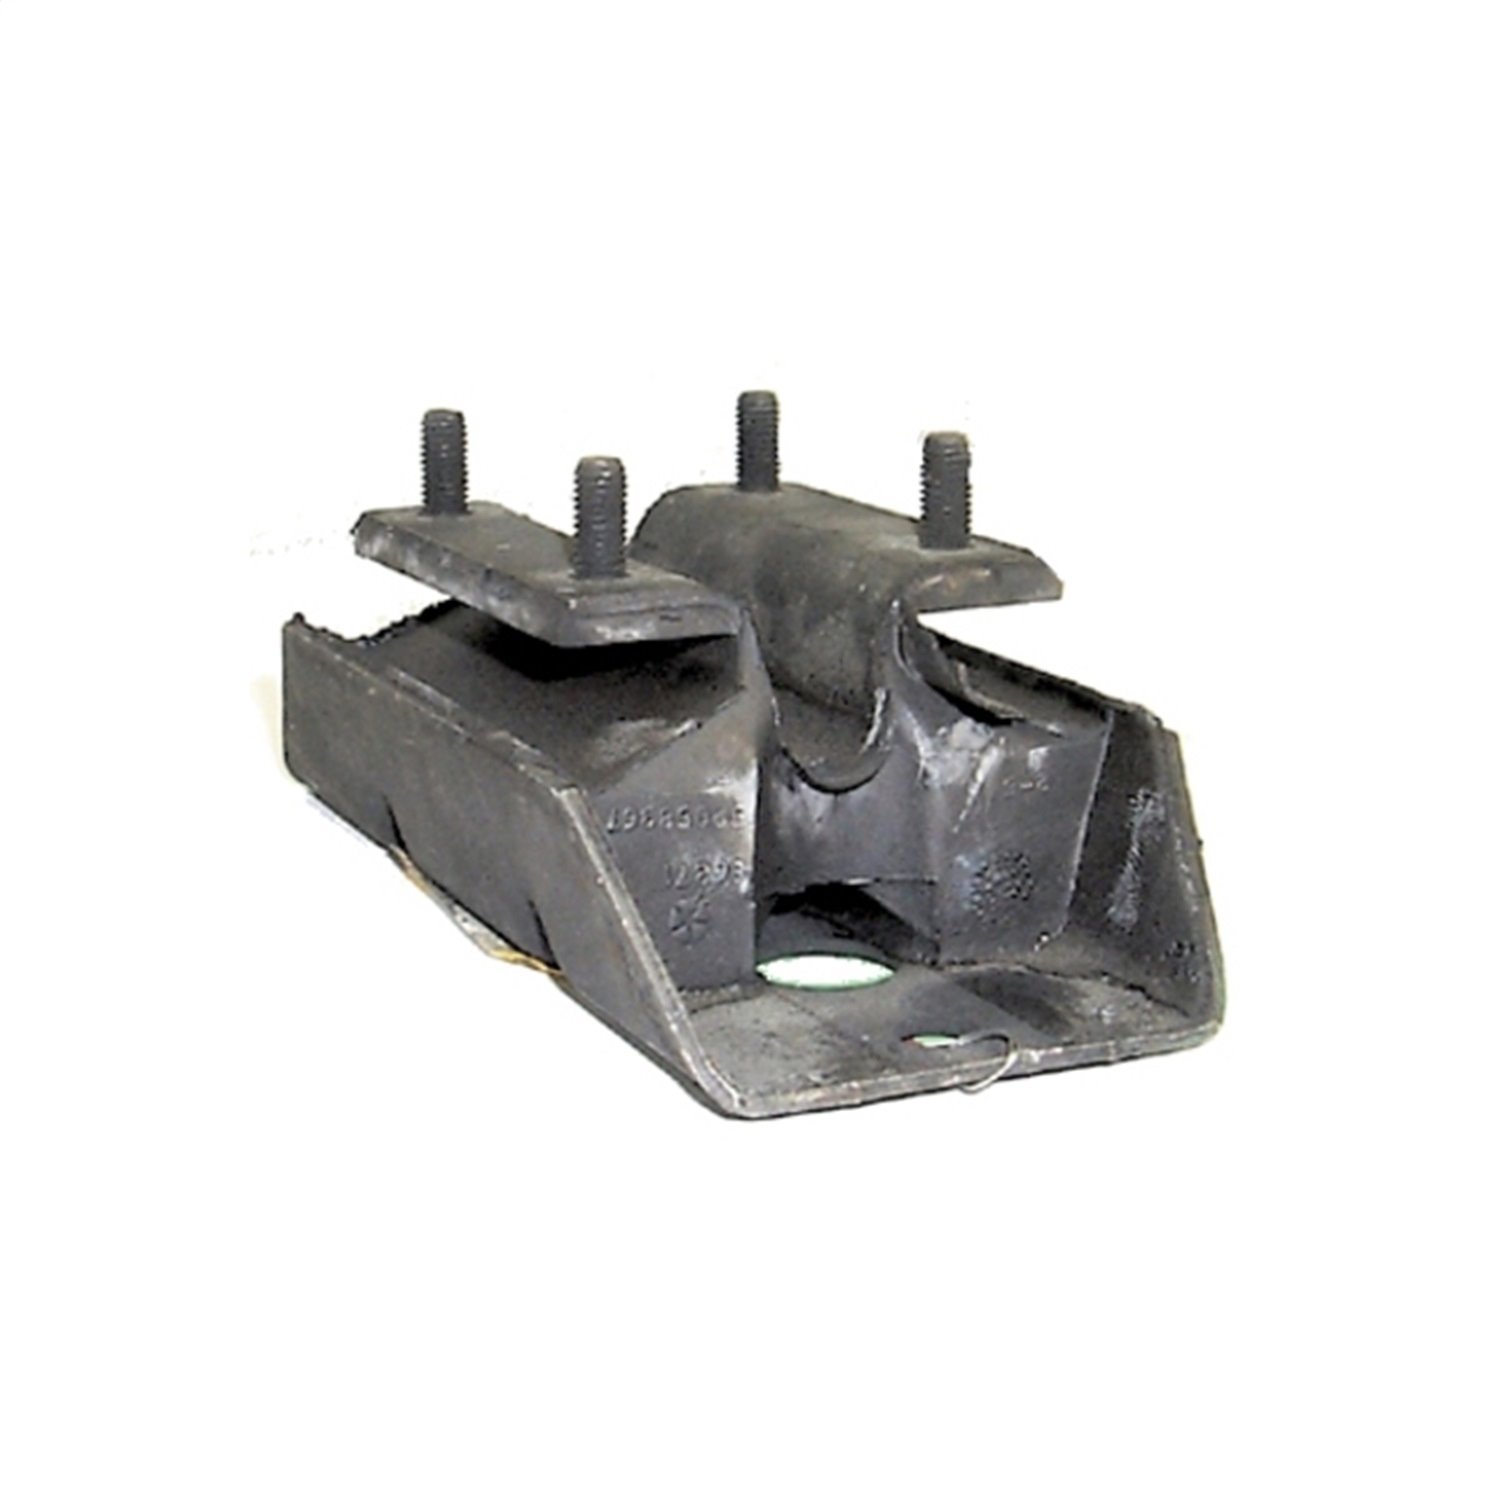 Stock replacement transmission mount from Omix-ADA, Fits 84-00 Jeep Cherokee XJ with 2.5 lit